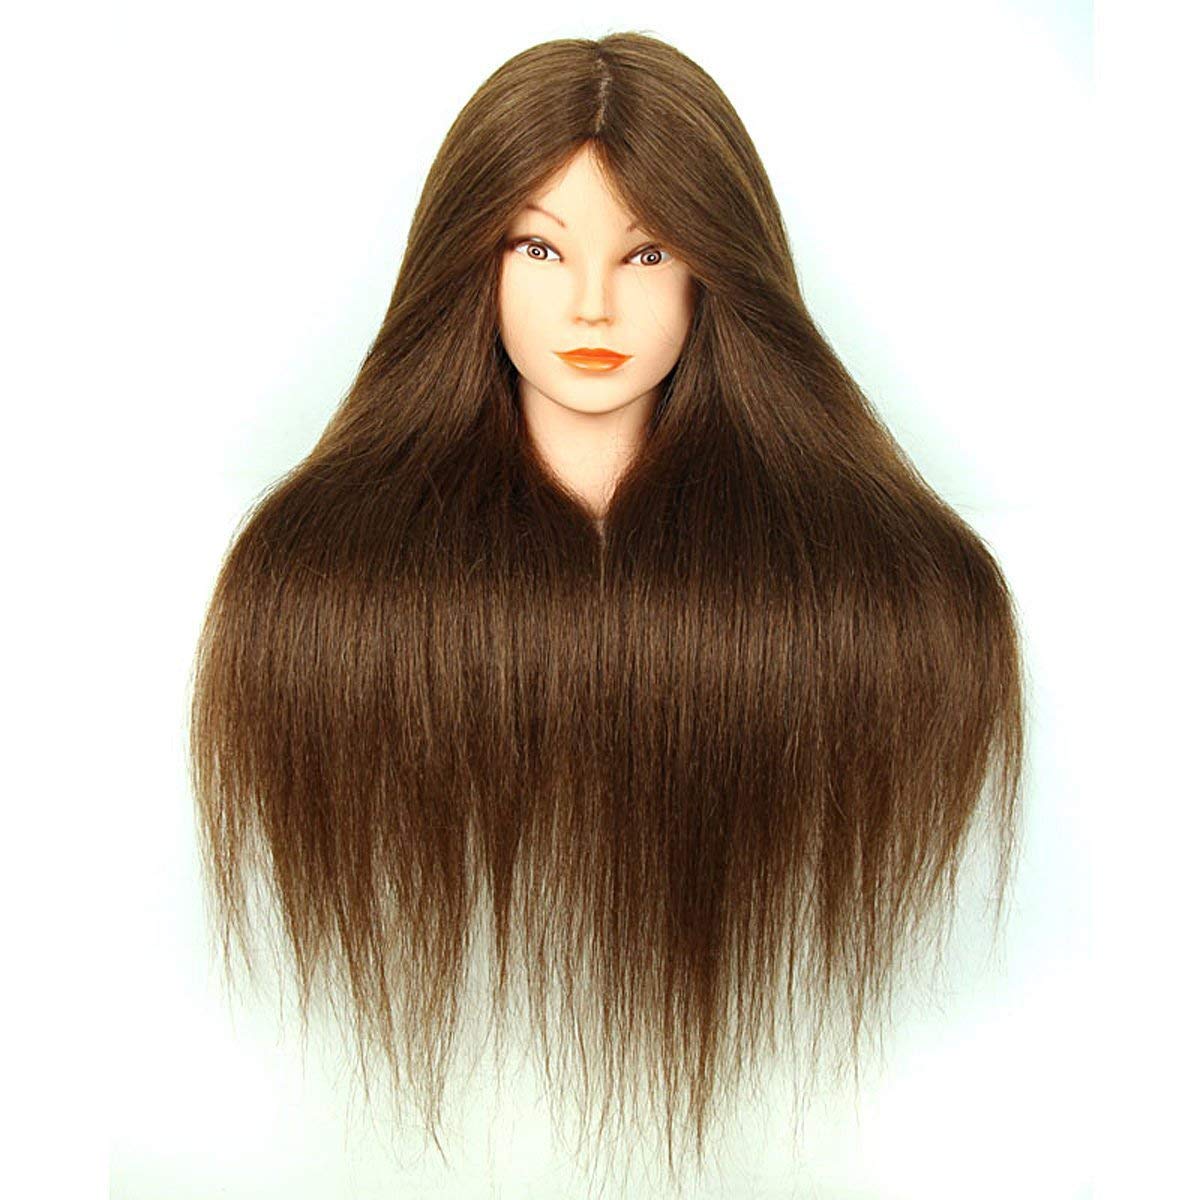 31 Inch Long Dark Brown Color Straight Animal Hair Professional Hair Dummy For All Purpose.